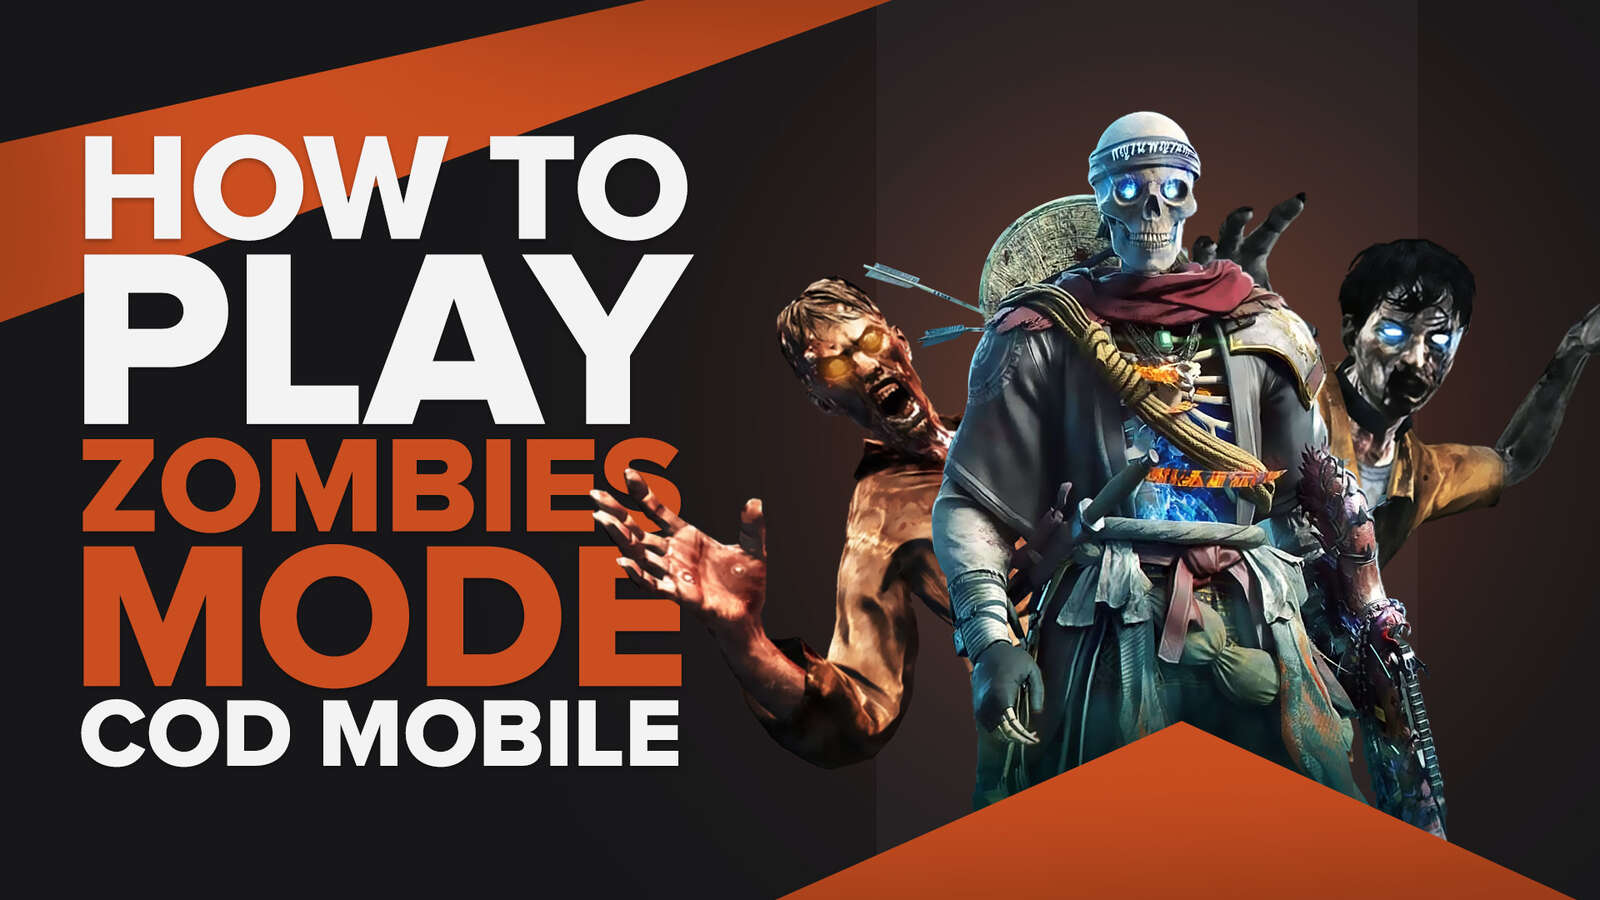 How To Play Zombies Mode in CoD Mobile [Step-by-Step]